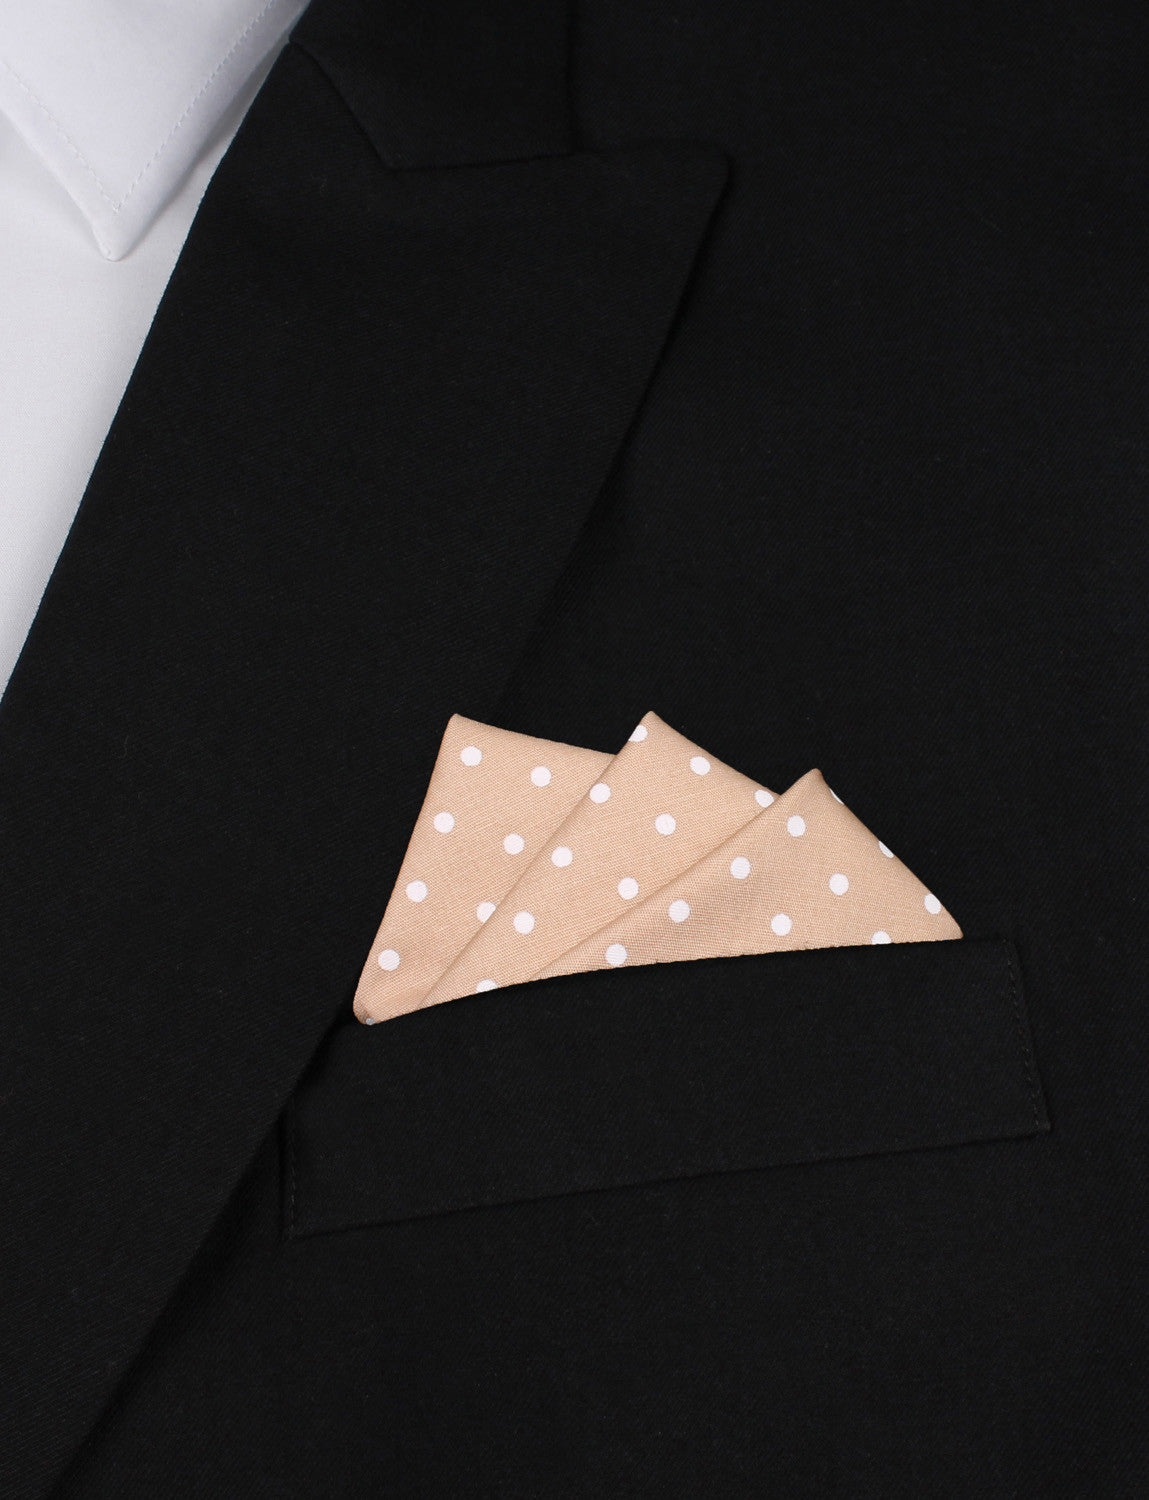 Light Brown with White Polka Dots Cotton Oxygen Three Point Pocket Square Fold